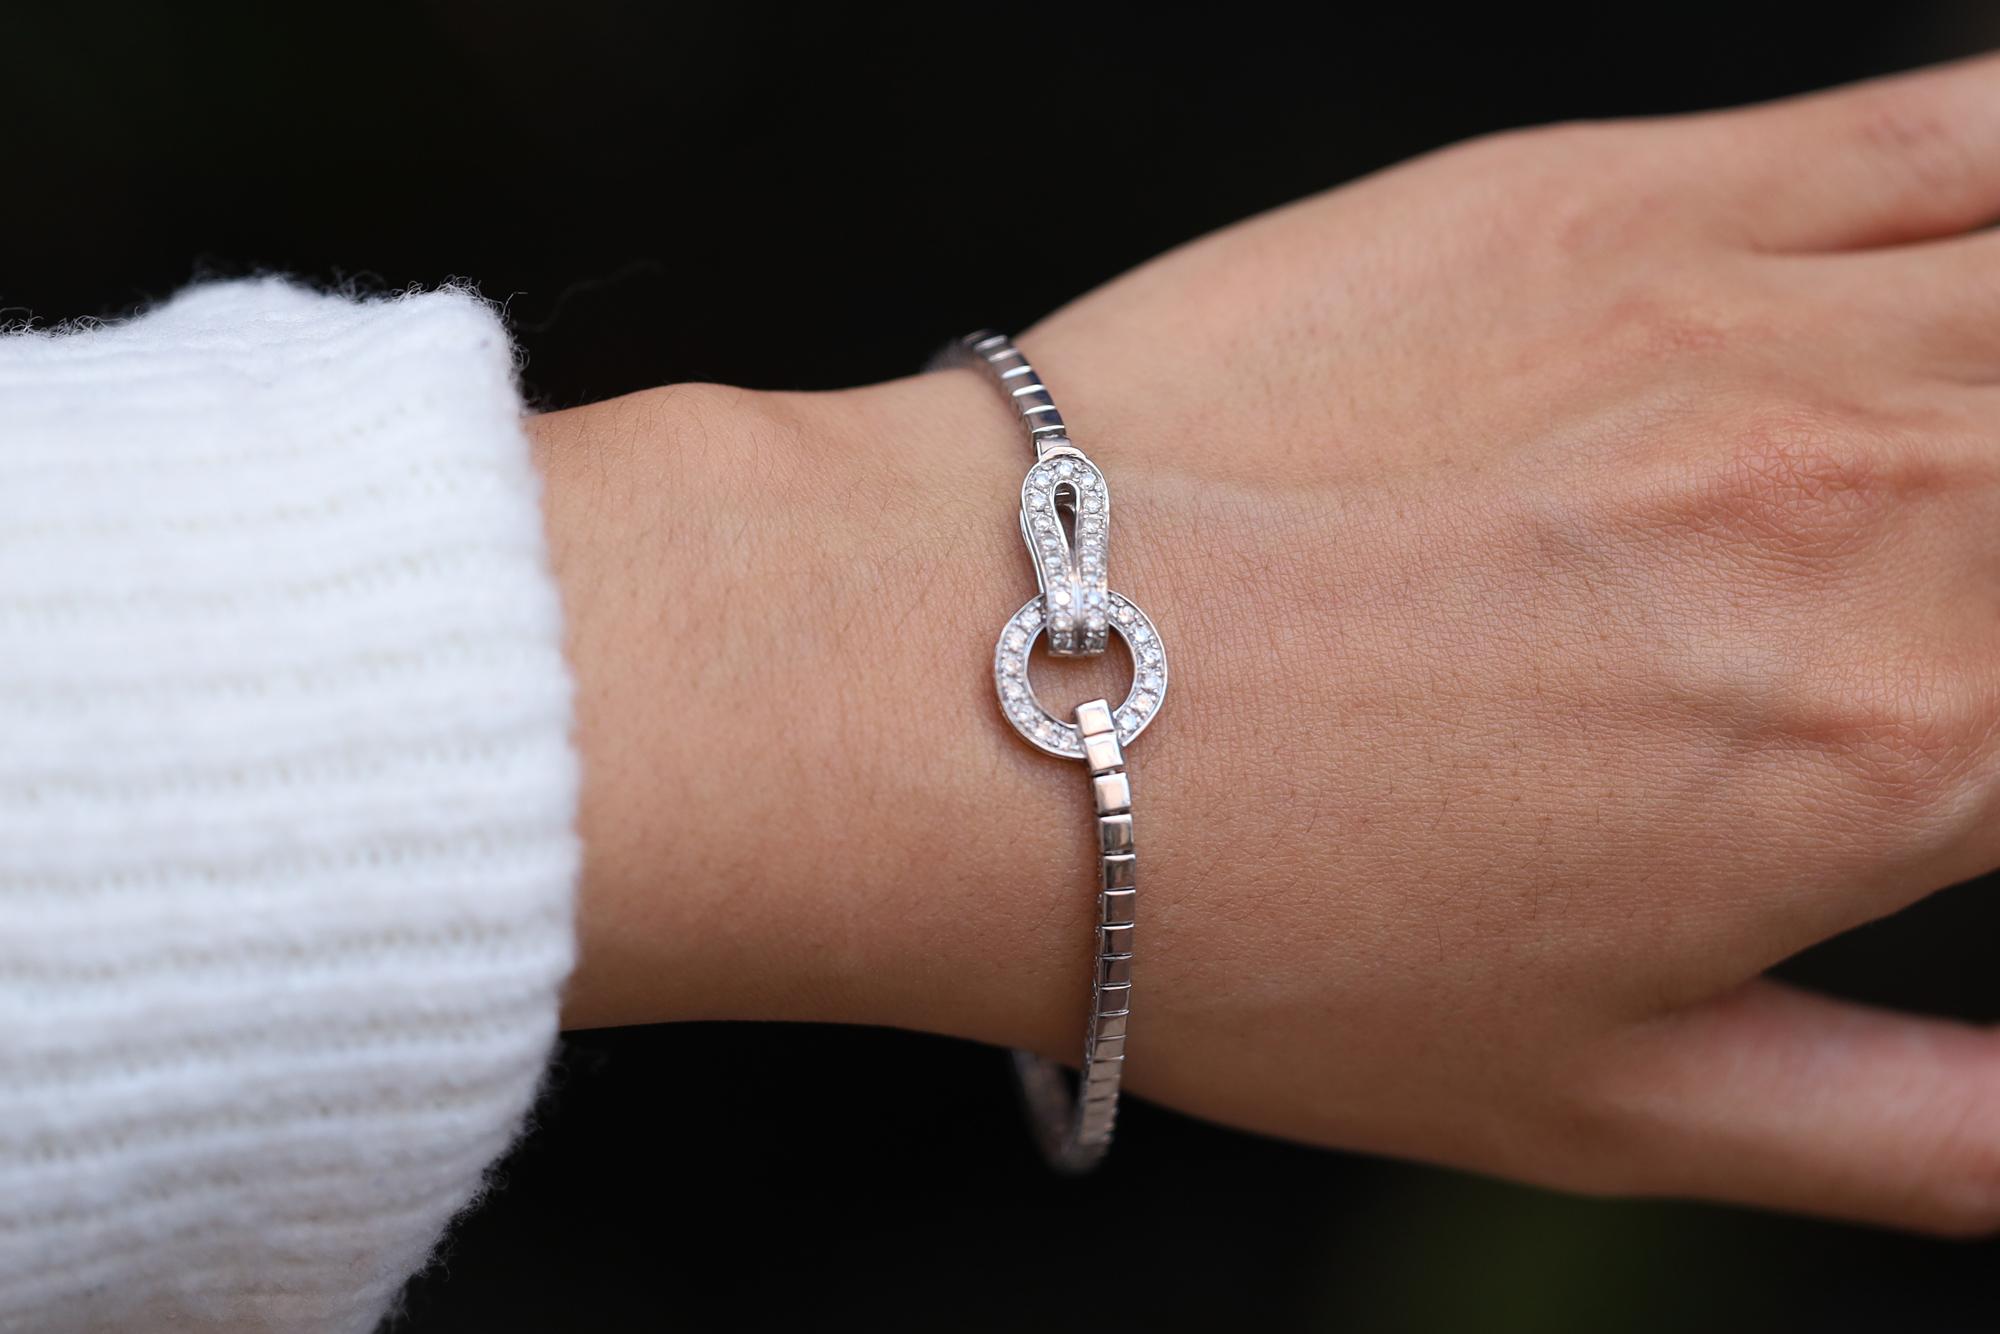 A classy and contemporary designer bracelet, perfectly petite with a chic shimmer. This Italian made bracelet is expertly crafted in luxurious 18k white gold throughout, with a beautiful buckle clasp, easy to don and doff. Laced with 35 natural